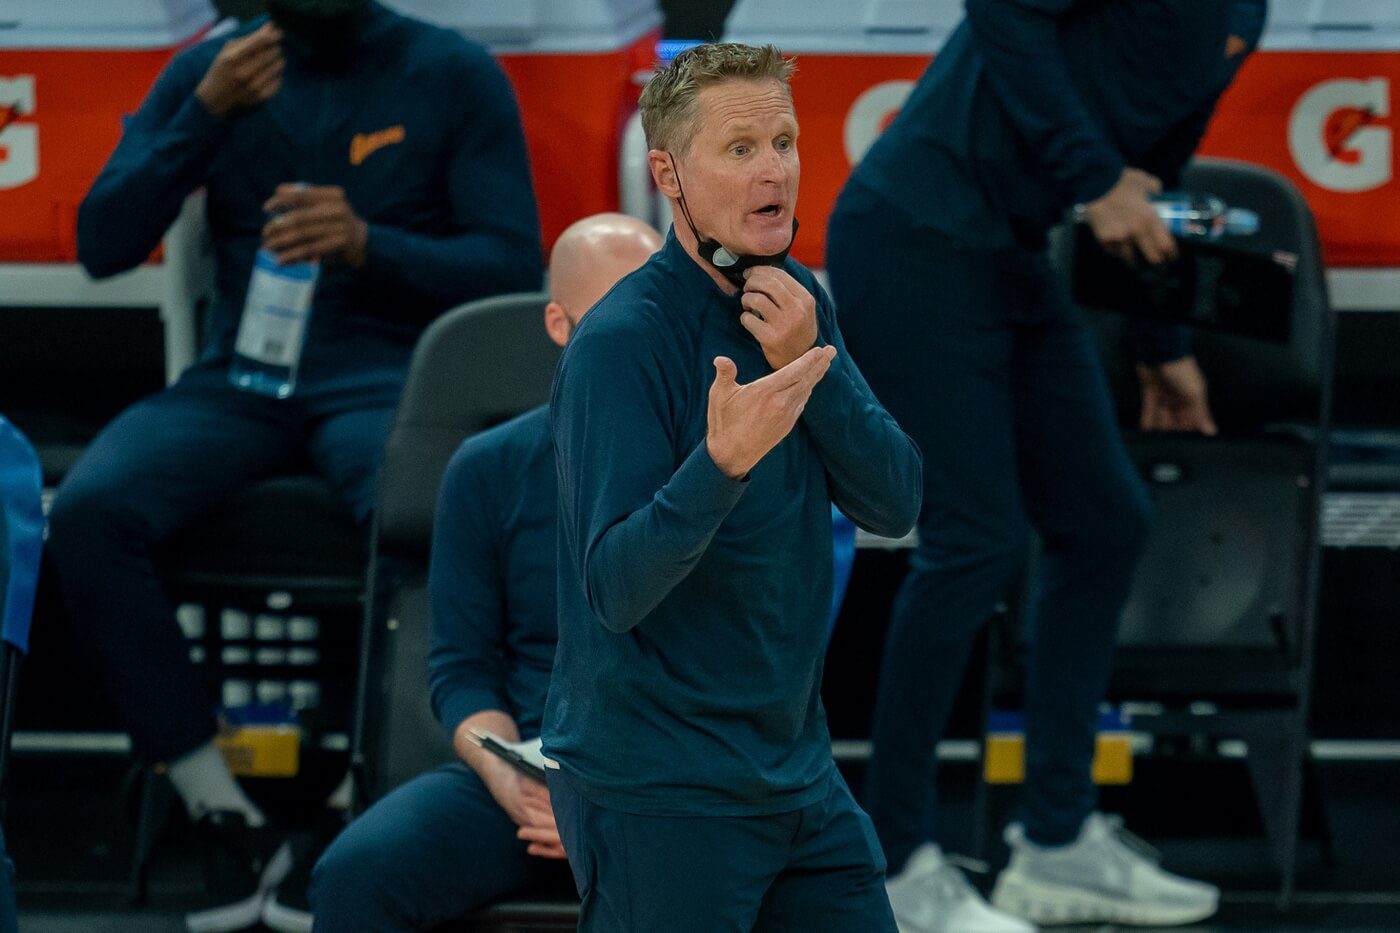 Golden State Warriors head coach Steve Kerr instructs players from the sidelines against the Miami Heat during the first quarter at Chase Center.